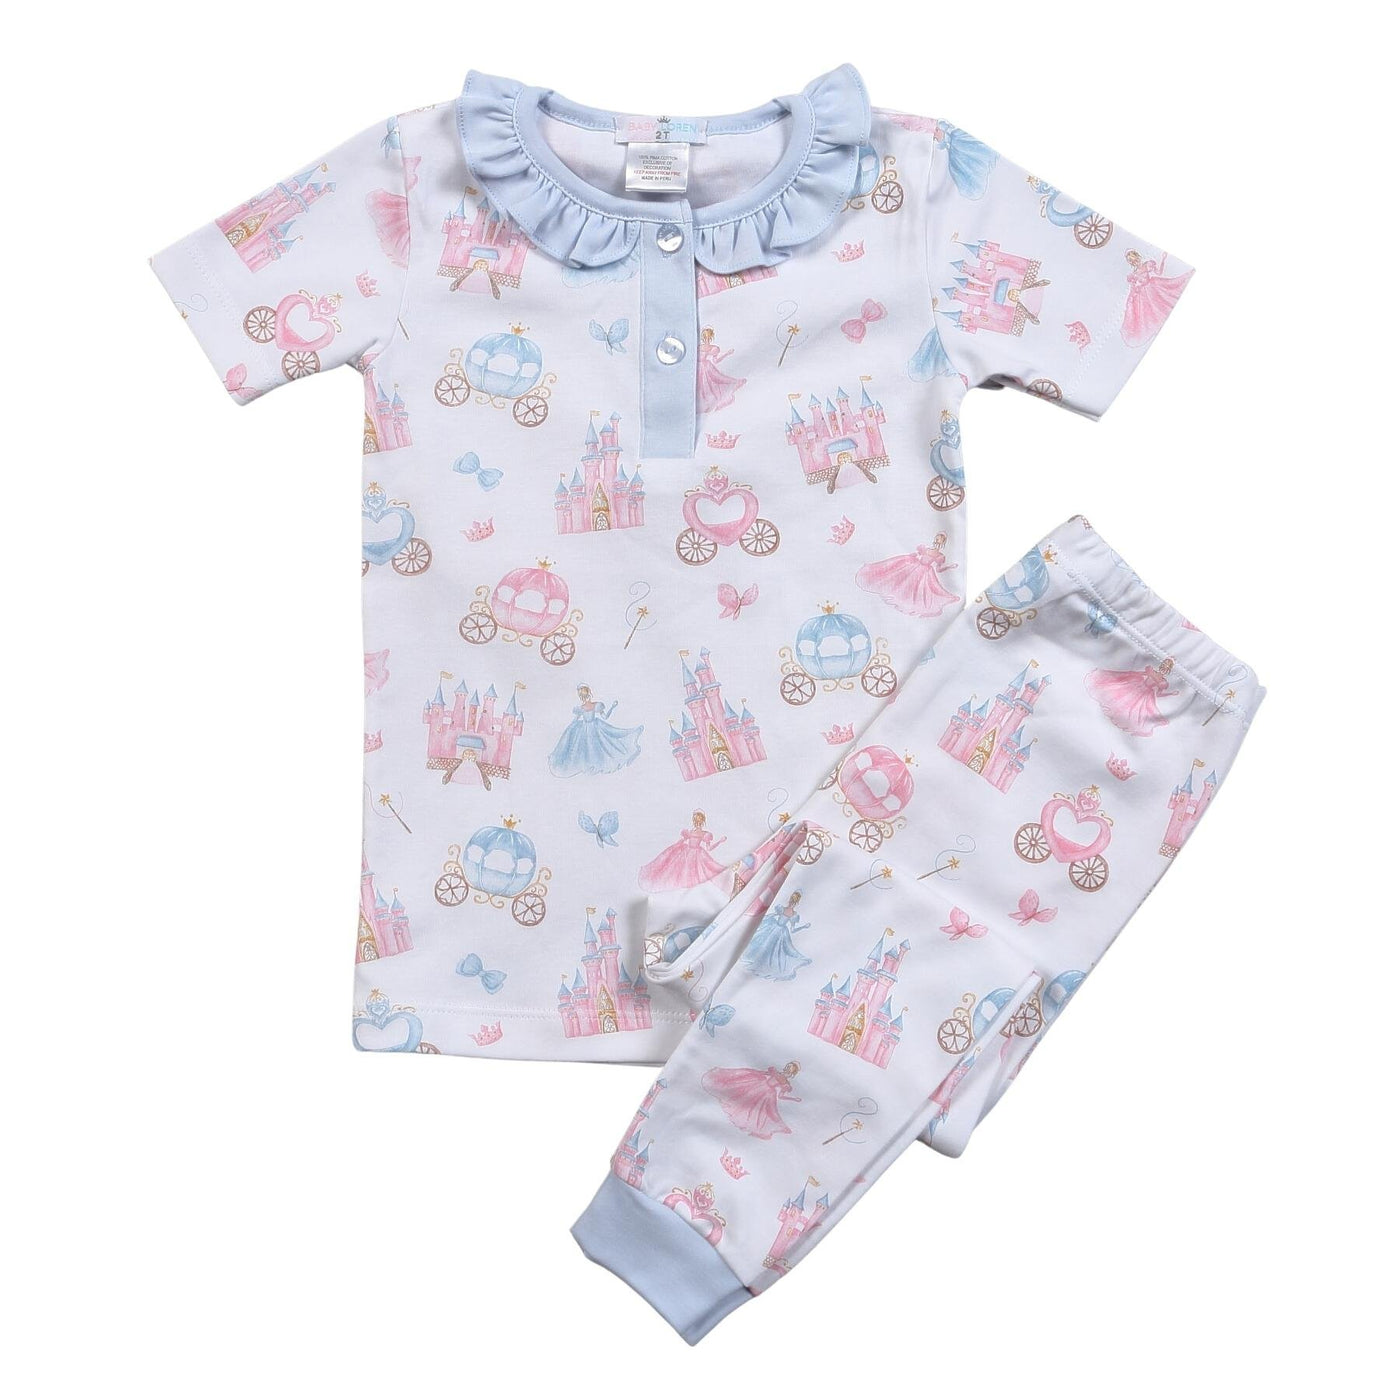 PRINCESS AND CASTLES PIMA TWO PIECES LOUNGE WEAR - Breckenridge Baby